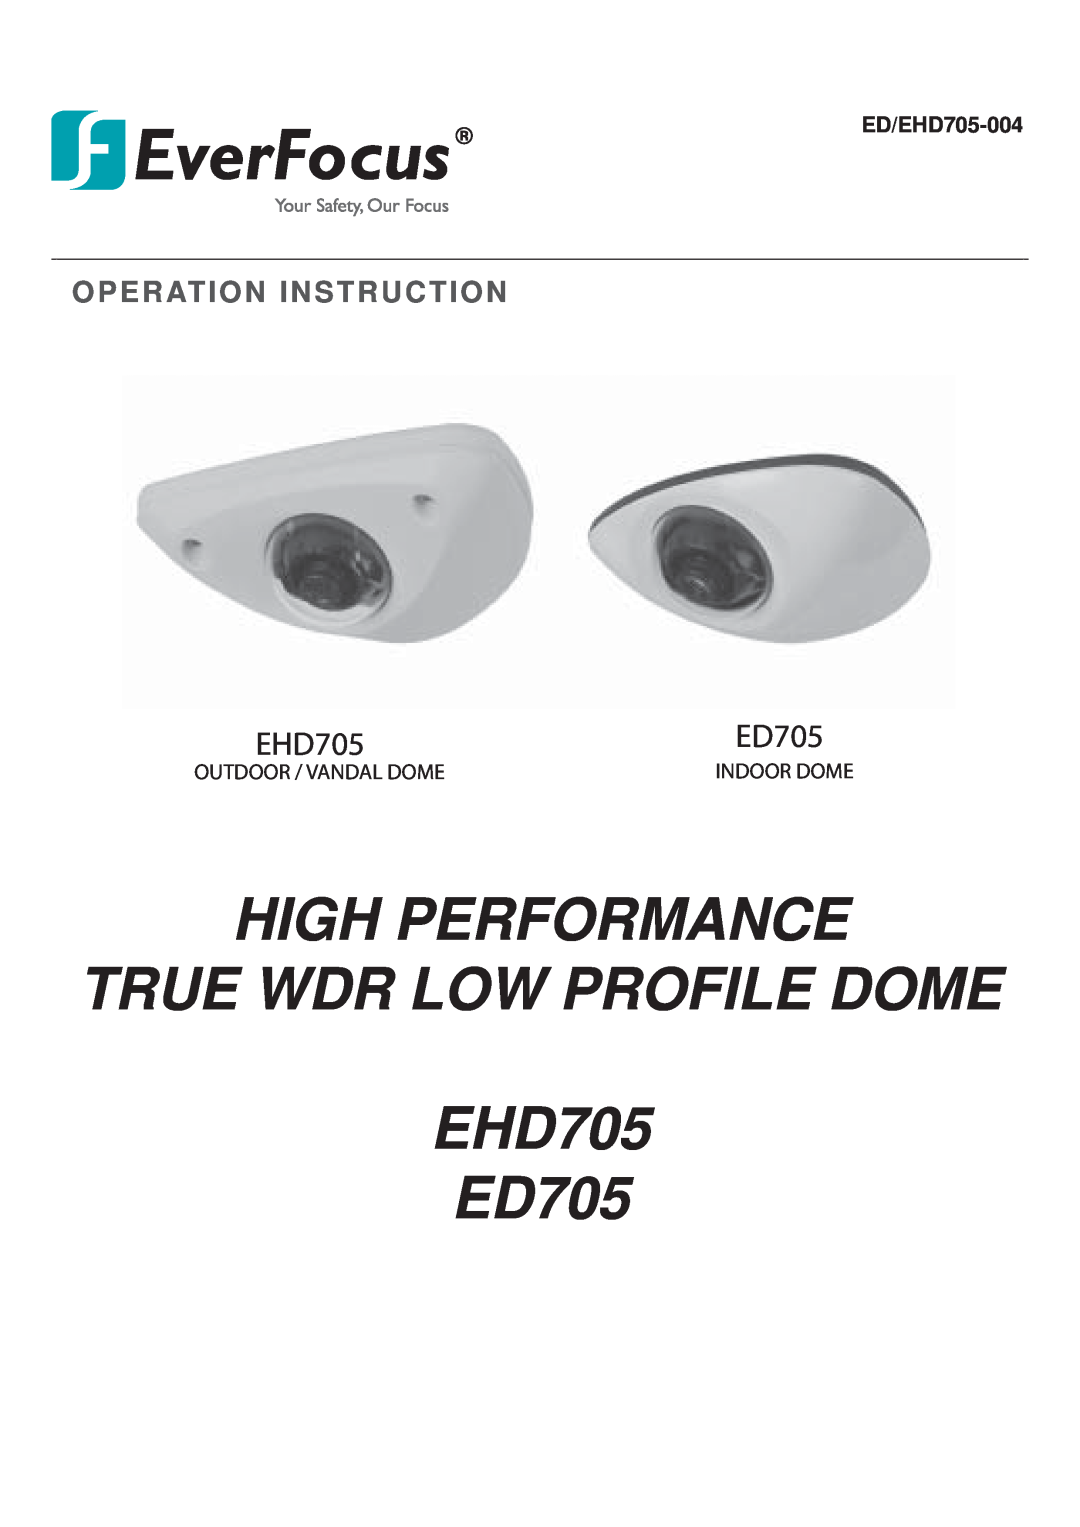 EverFocus ED705 manual HIGH PERFORMANCE TRUE WDR LOW PROFILE DOME EHD705, Operation Instruction, ED/EHD705-004 